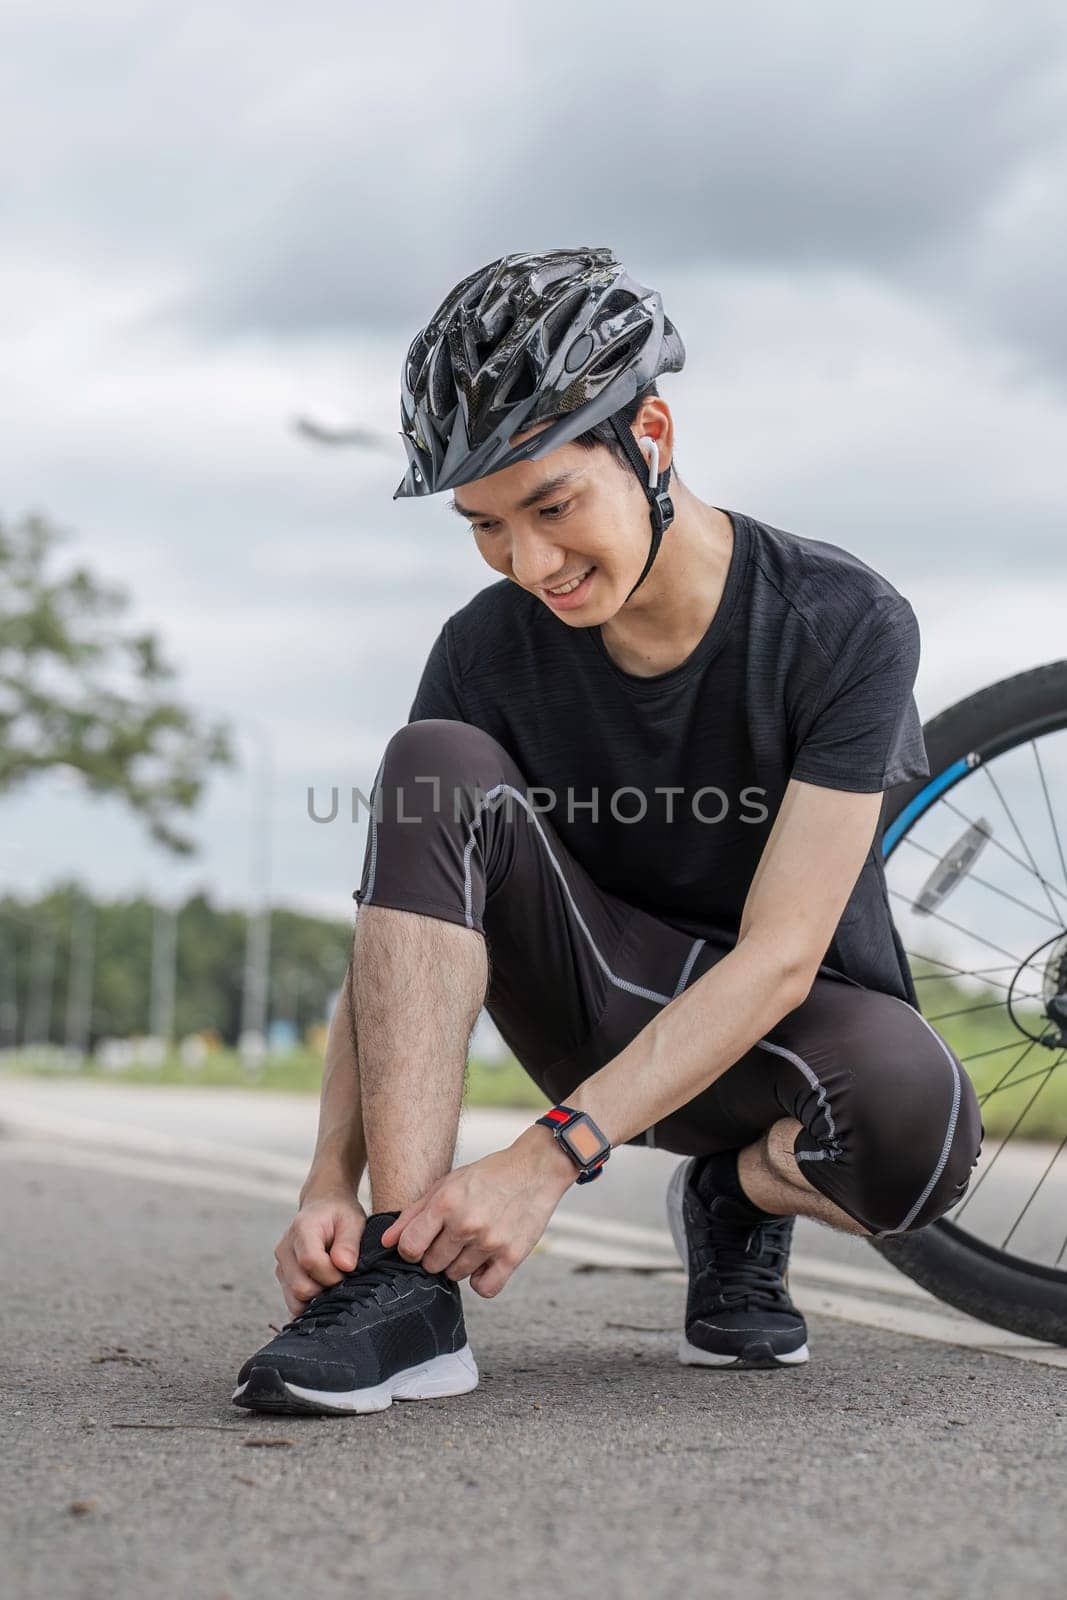 A healthy and strong male cyclist ties his shoe laces before riding a bicycle on a country road..